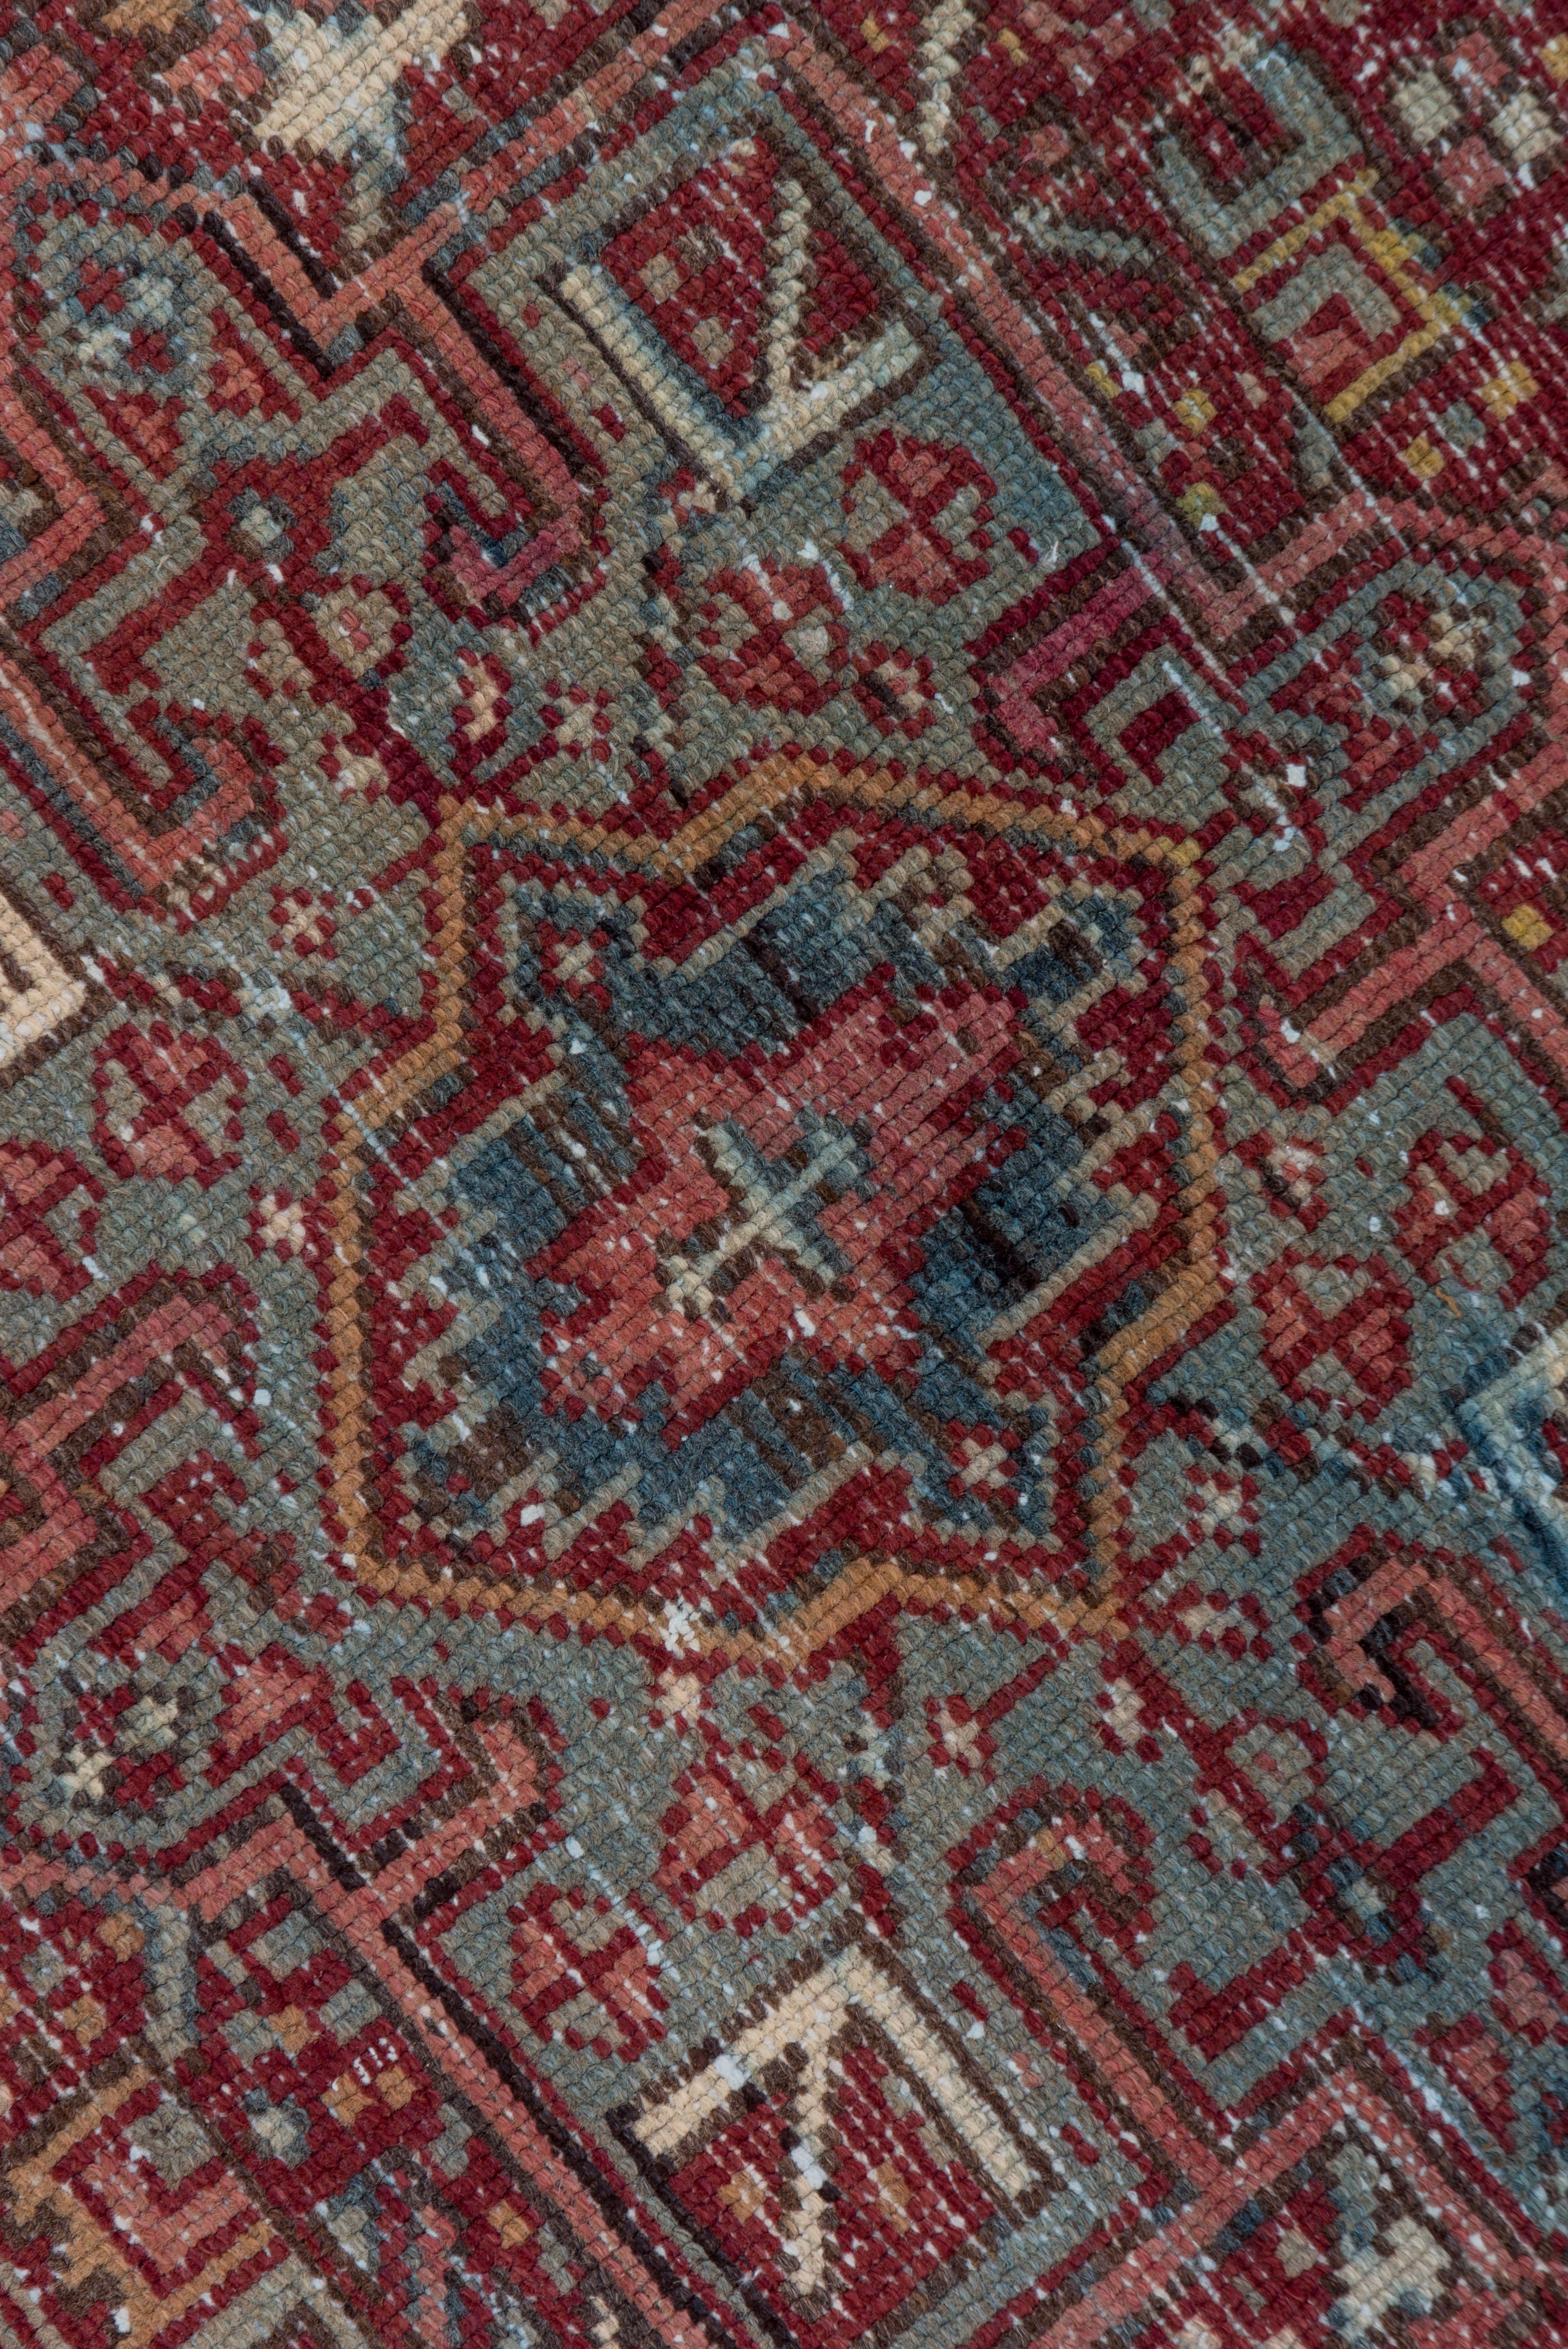 Hand-Knotted Shabby Chic Antique Persian Karaje Scatter Rug, Burgundy Field with Oxidation